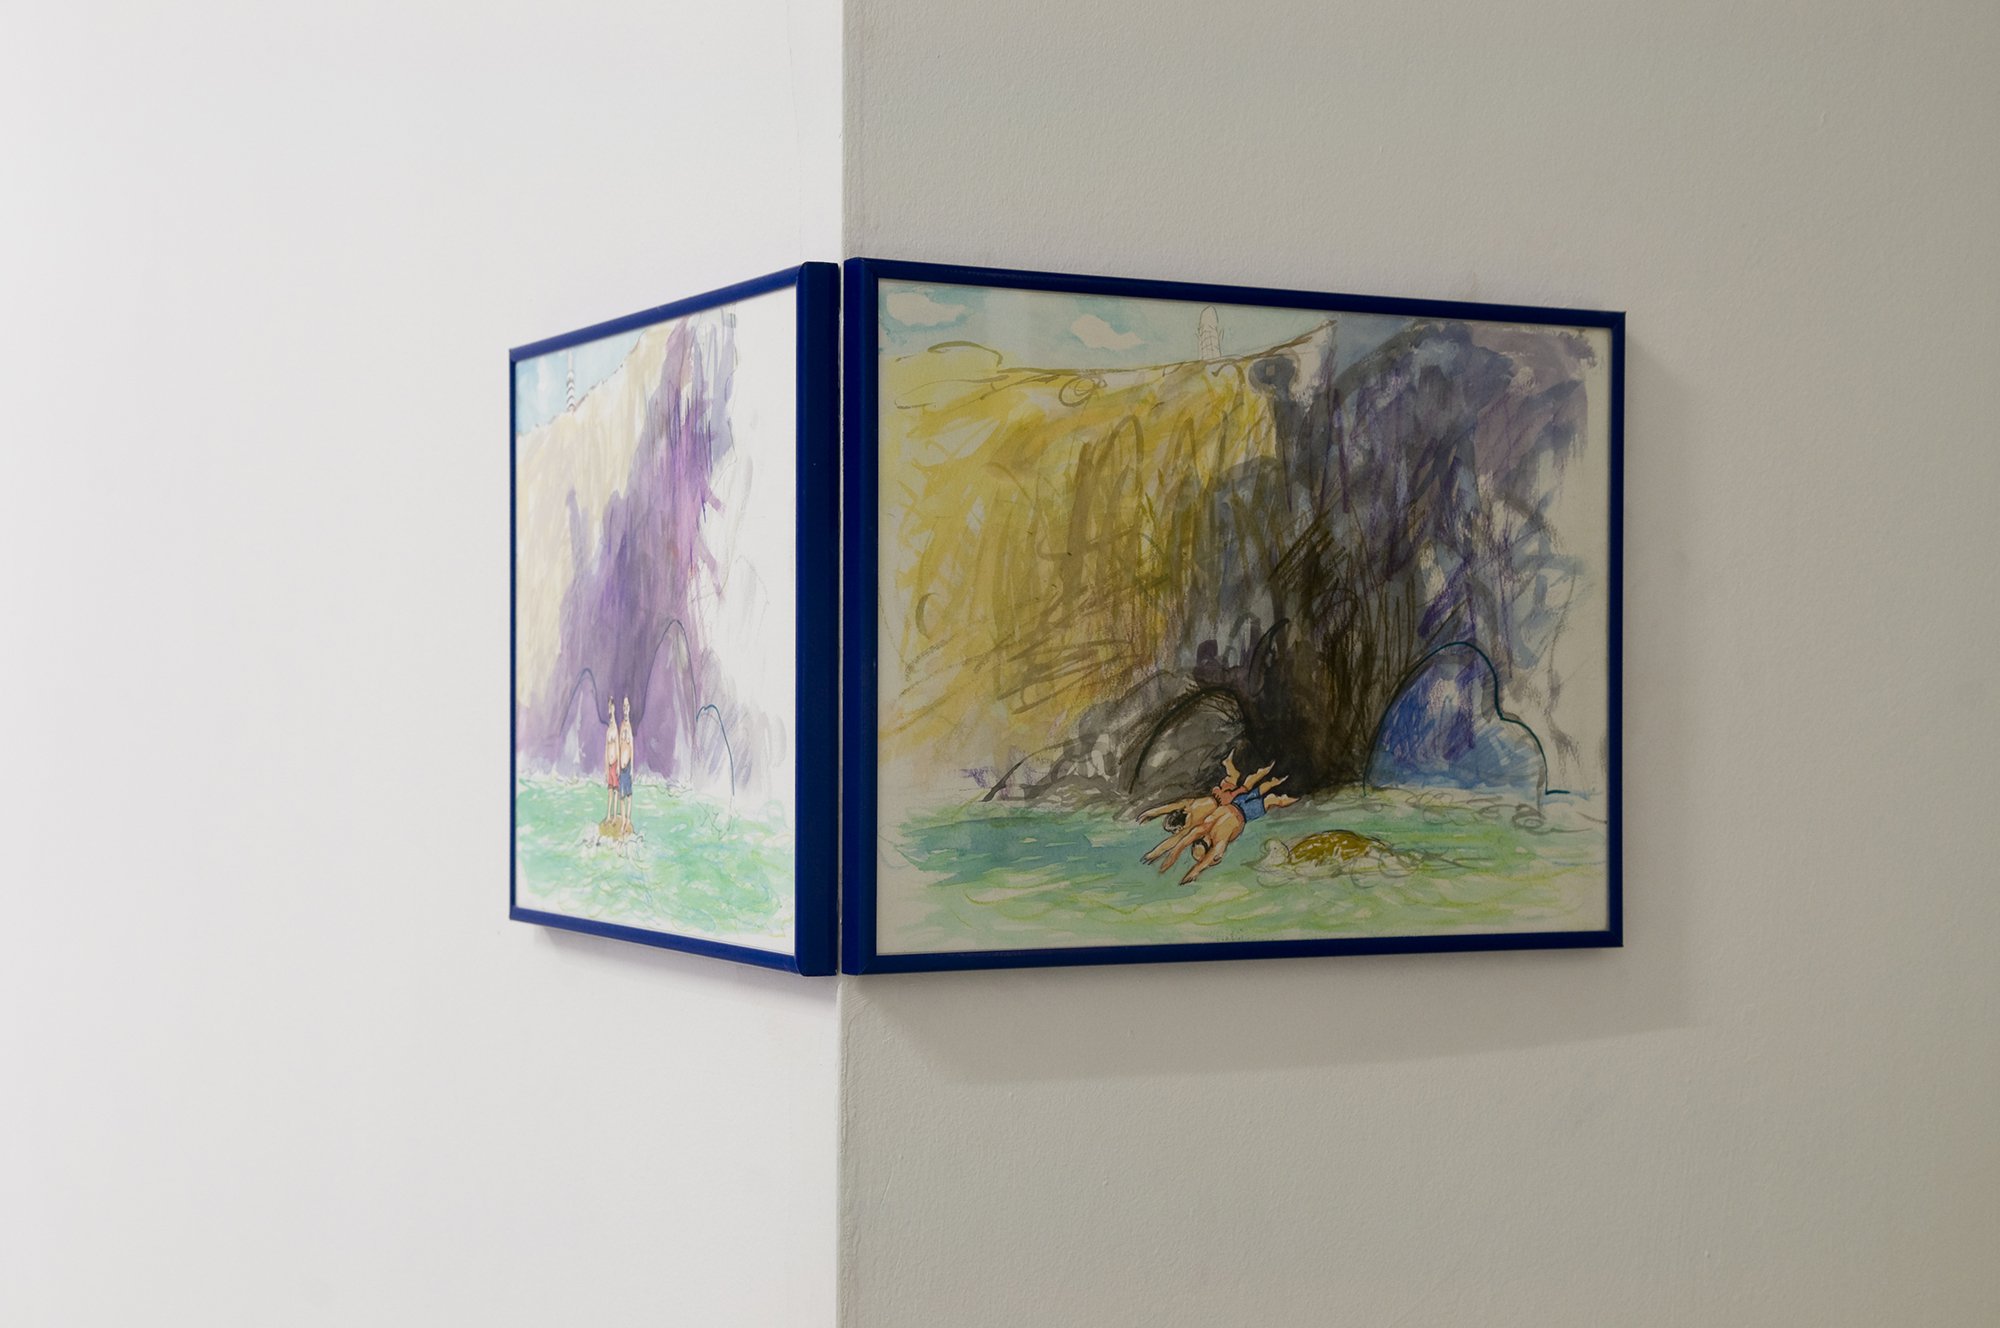 Lukas Duwenhögger, The Child Within (içindeki çocuk), gouache and crayon on paper, 24 x 32.5 cm (without frame), 2011. Installation view, Constellation (or the inspiration show), Rodeo, Istanbul, 2011 – 2012